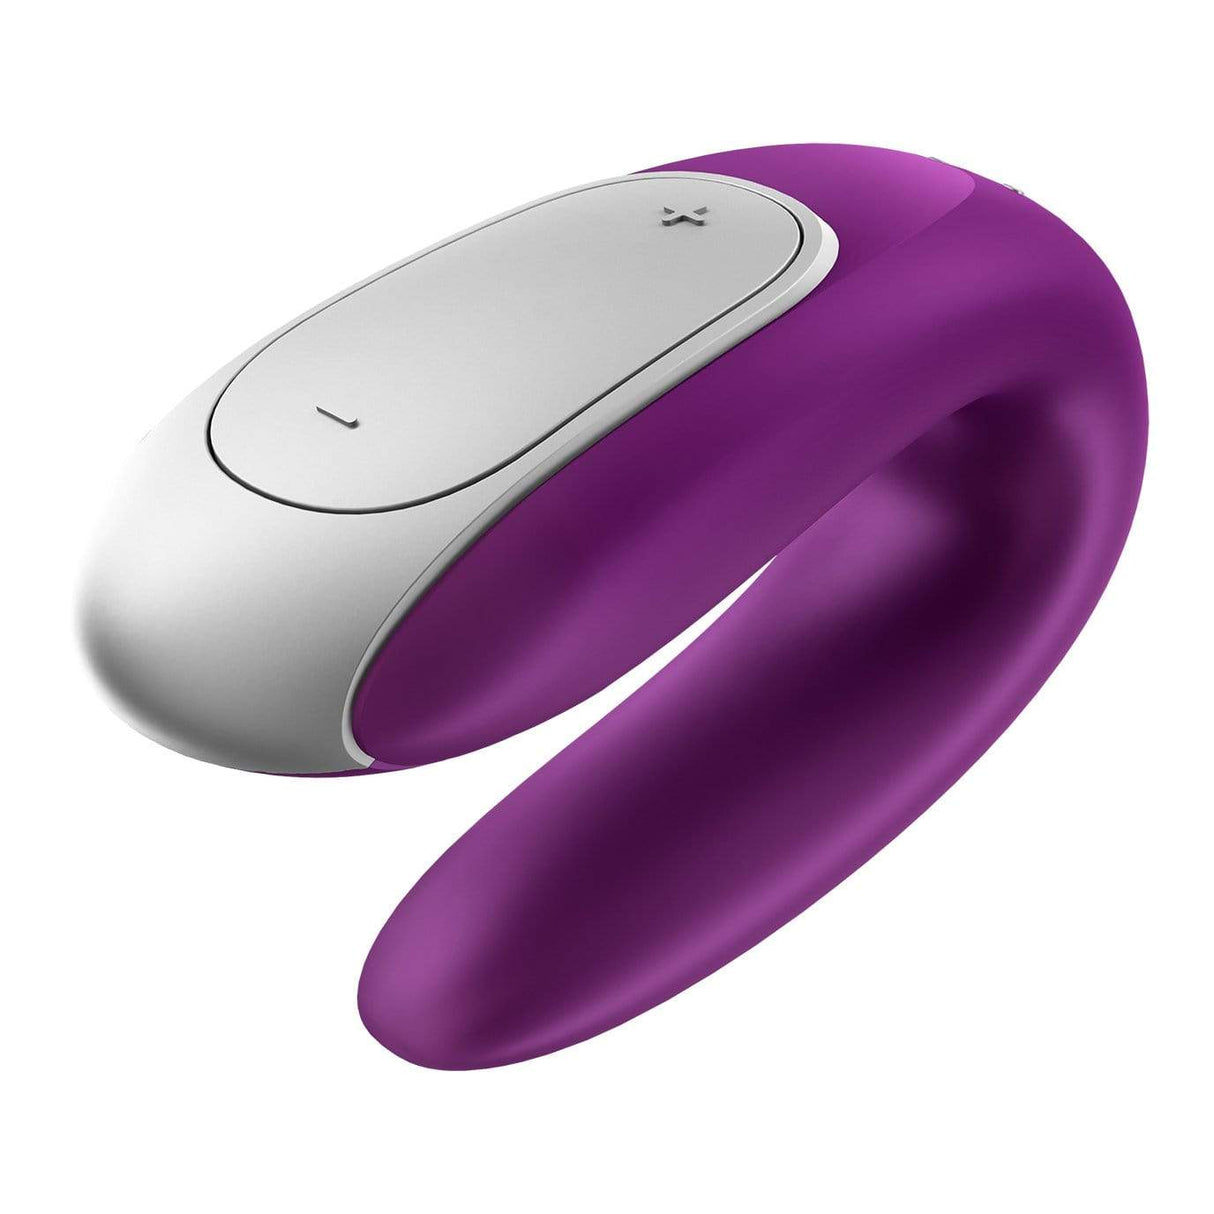 Satisfyer - Double Fun App-Controlled Couple's Vibrator with Remote Control CherryAffairs